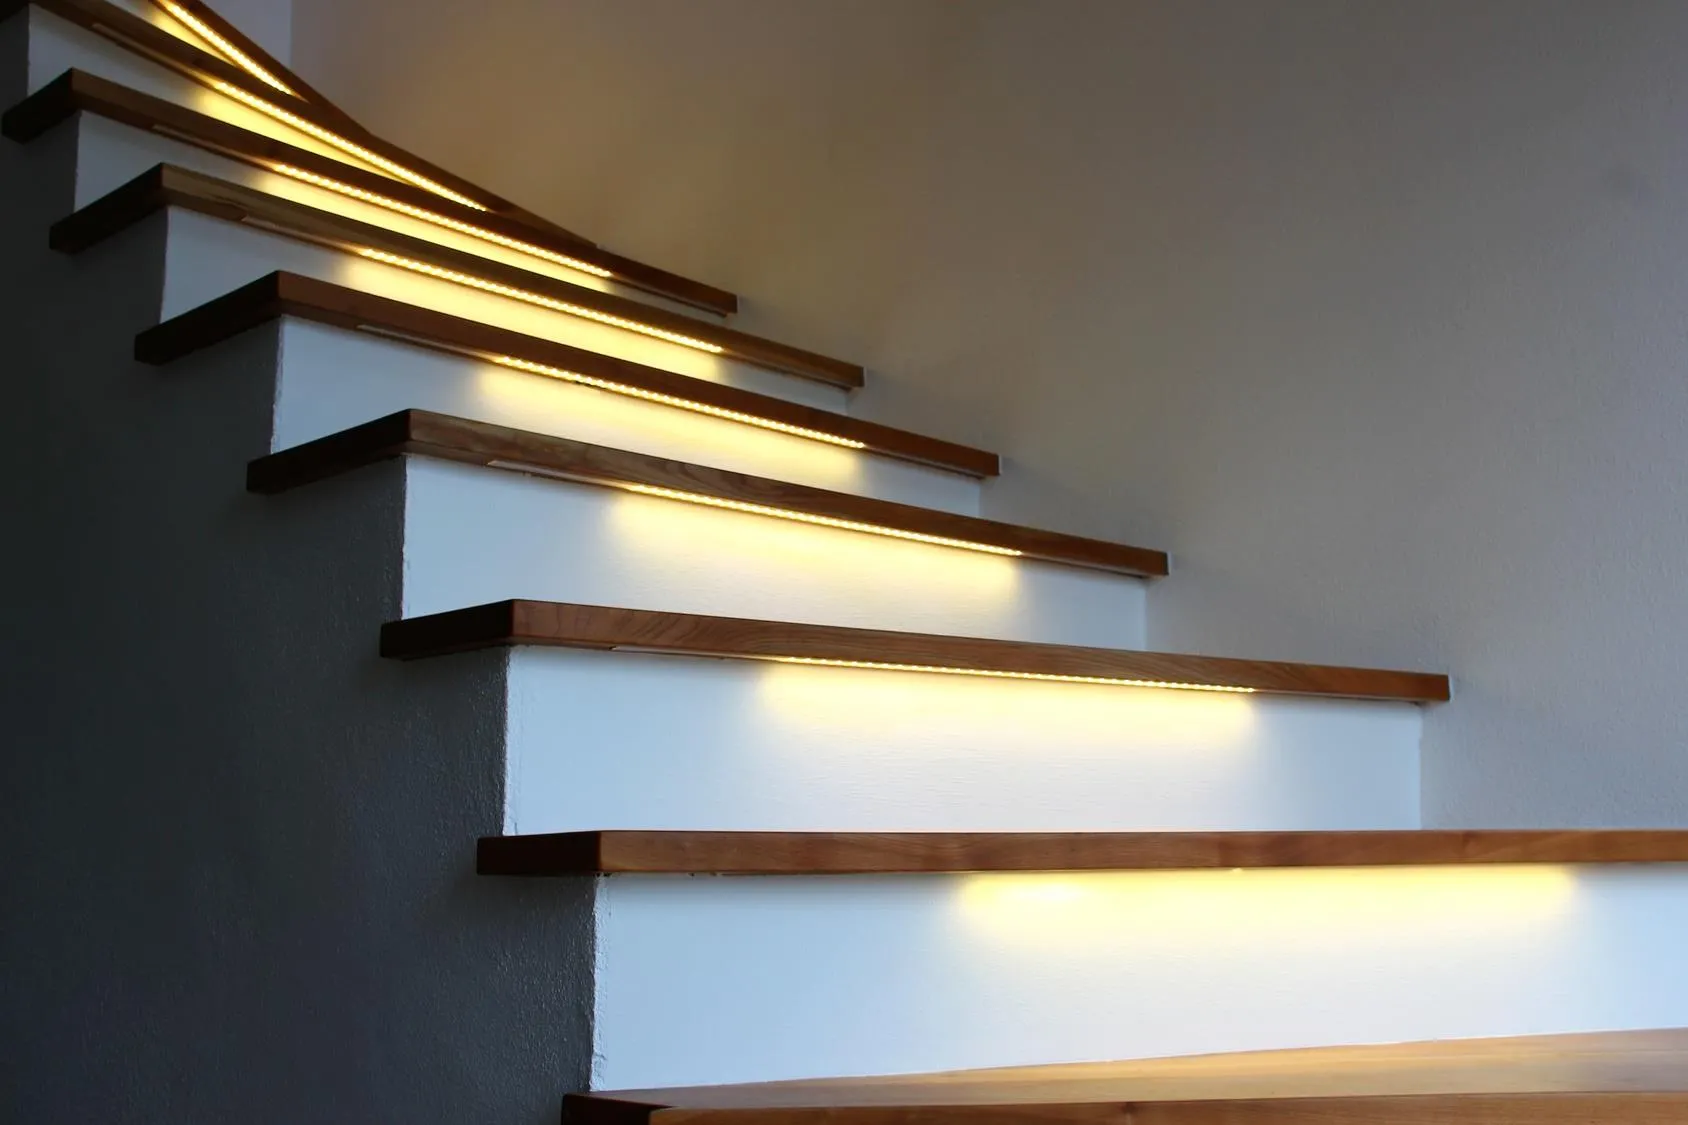 LED lights under stairs